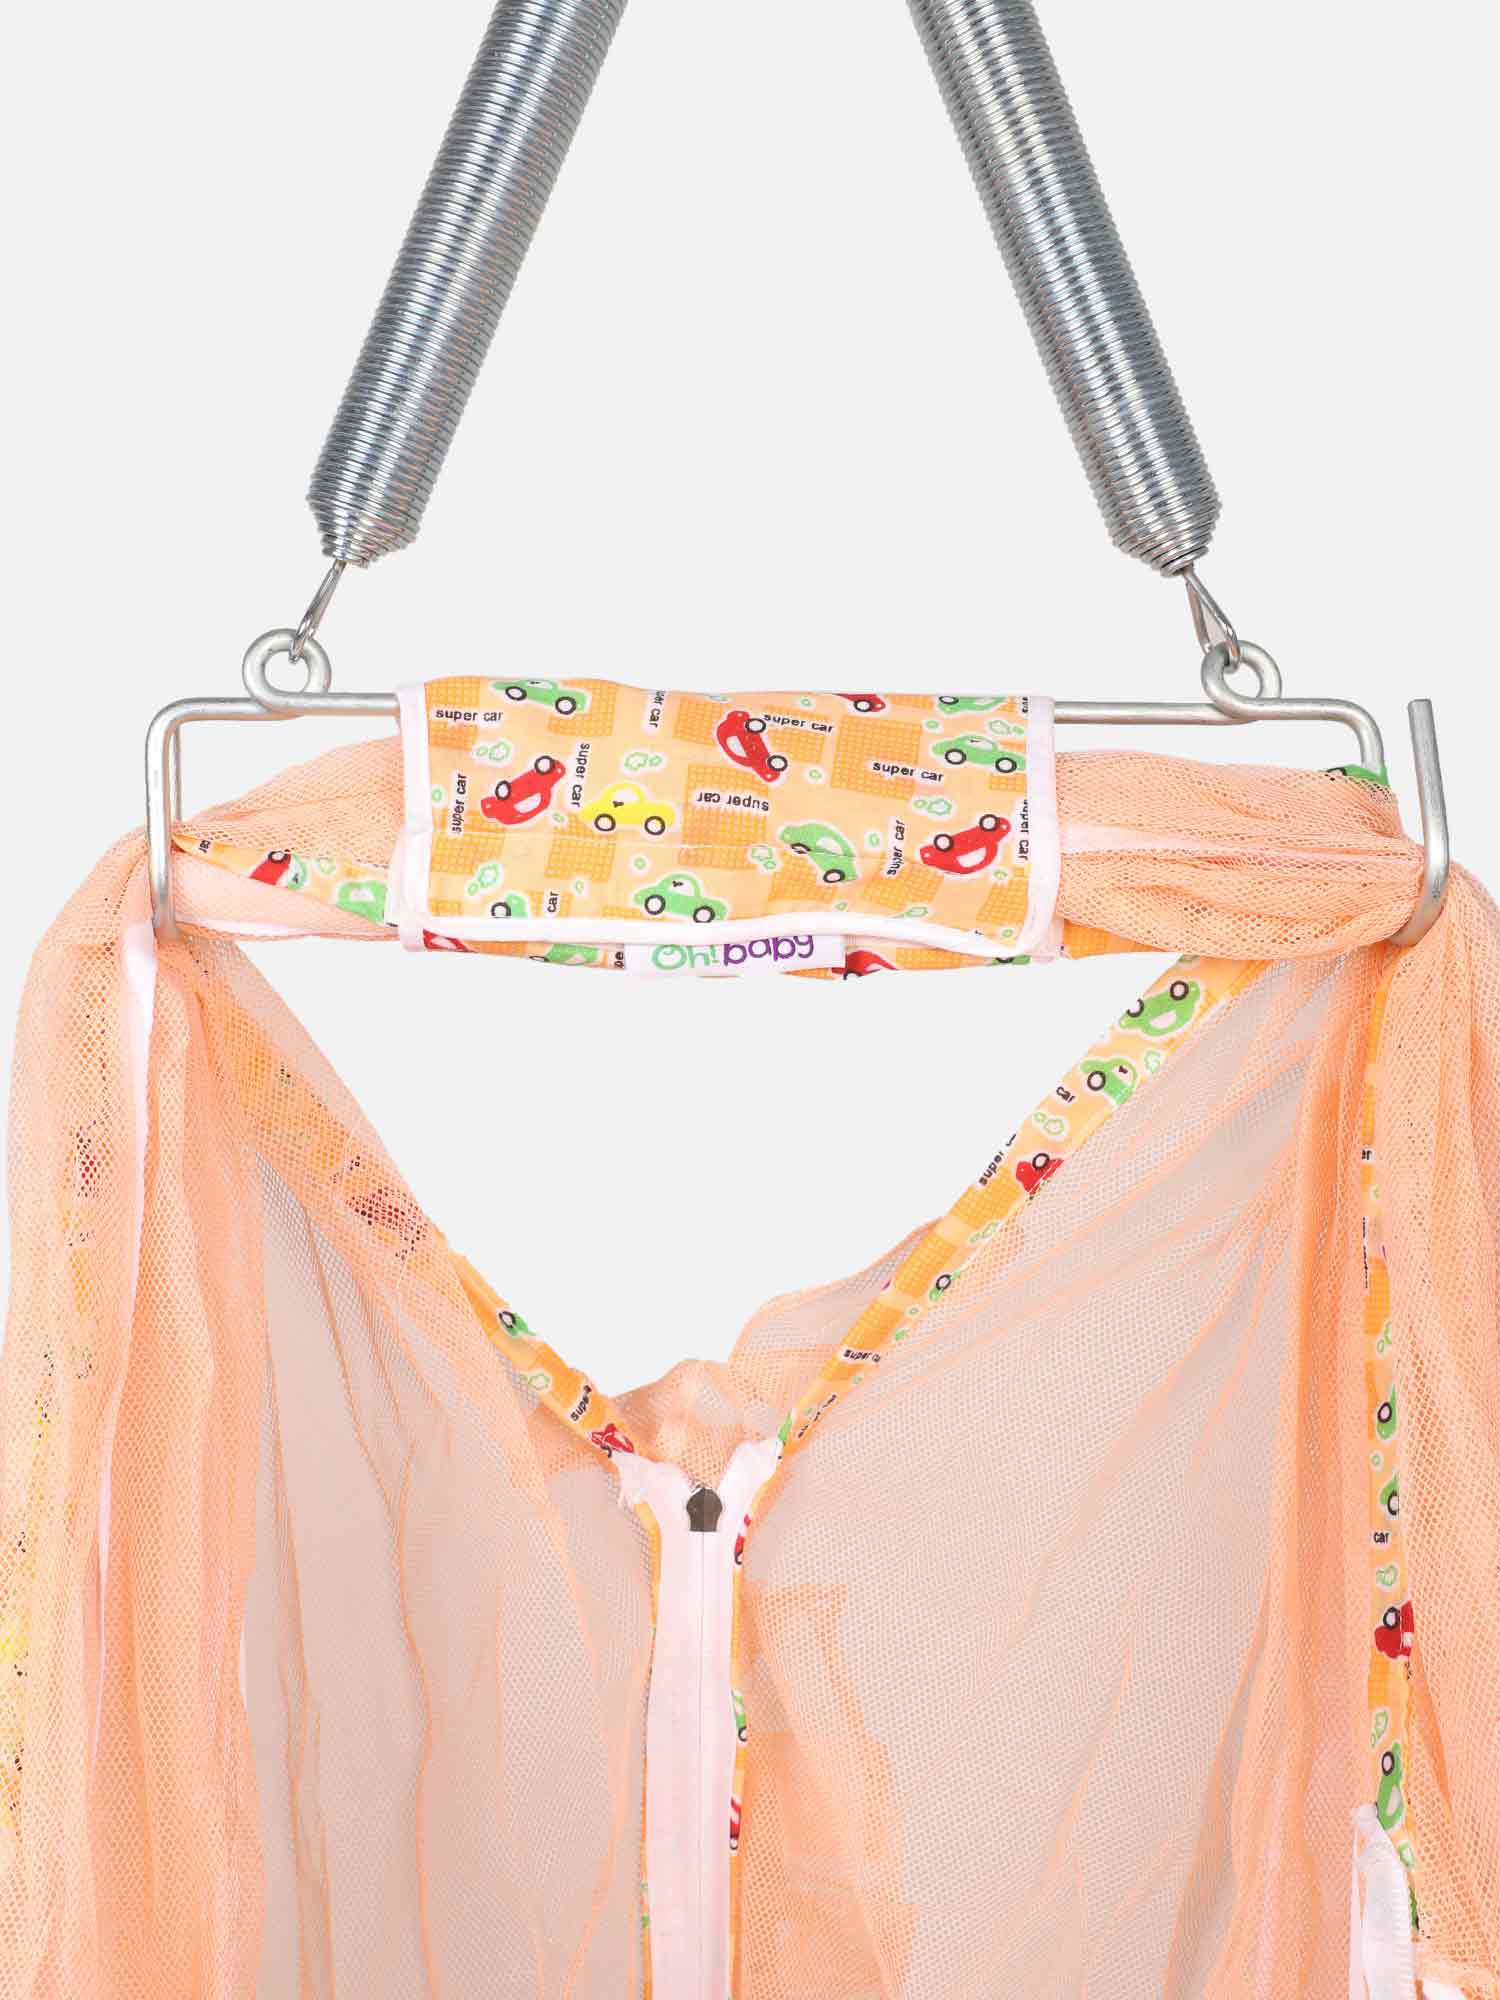 Oh Baby Printed Thuli Mosquito Net Cotton Bed - Orange